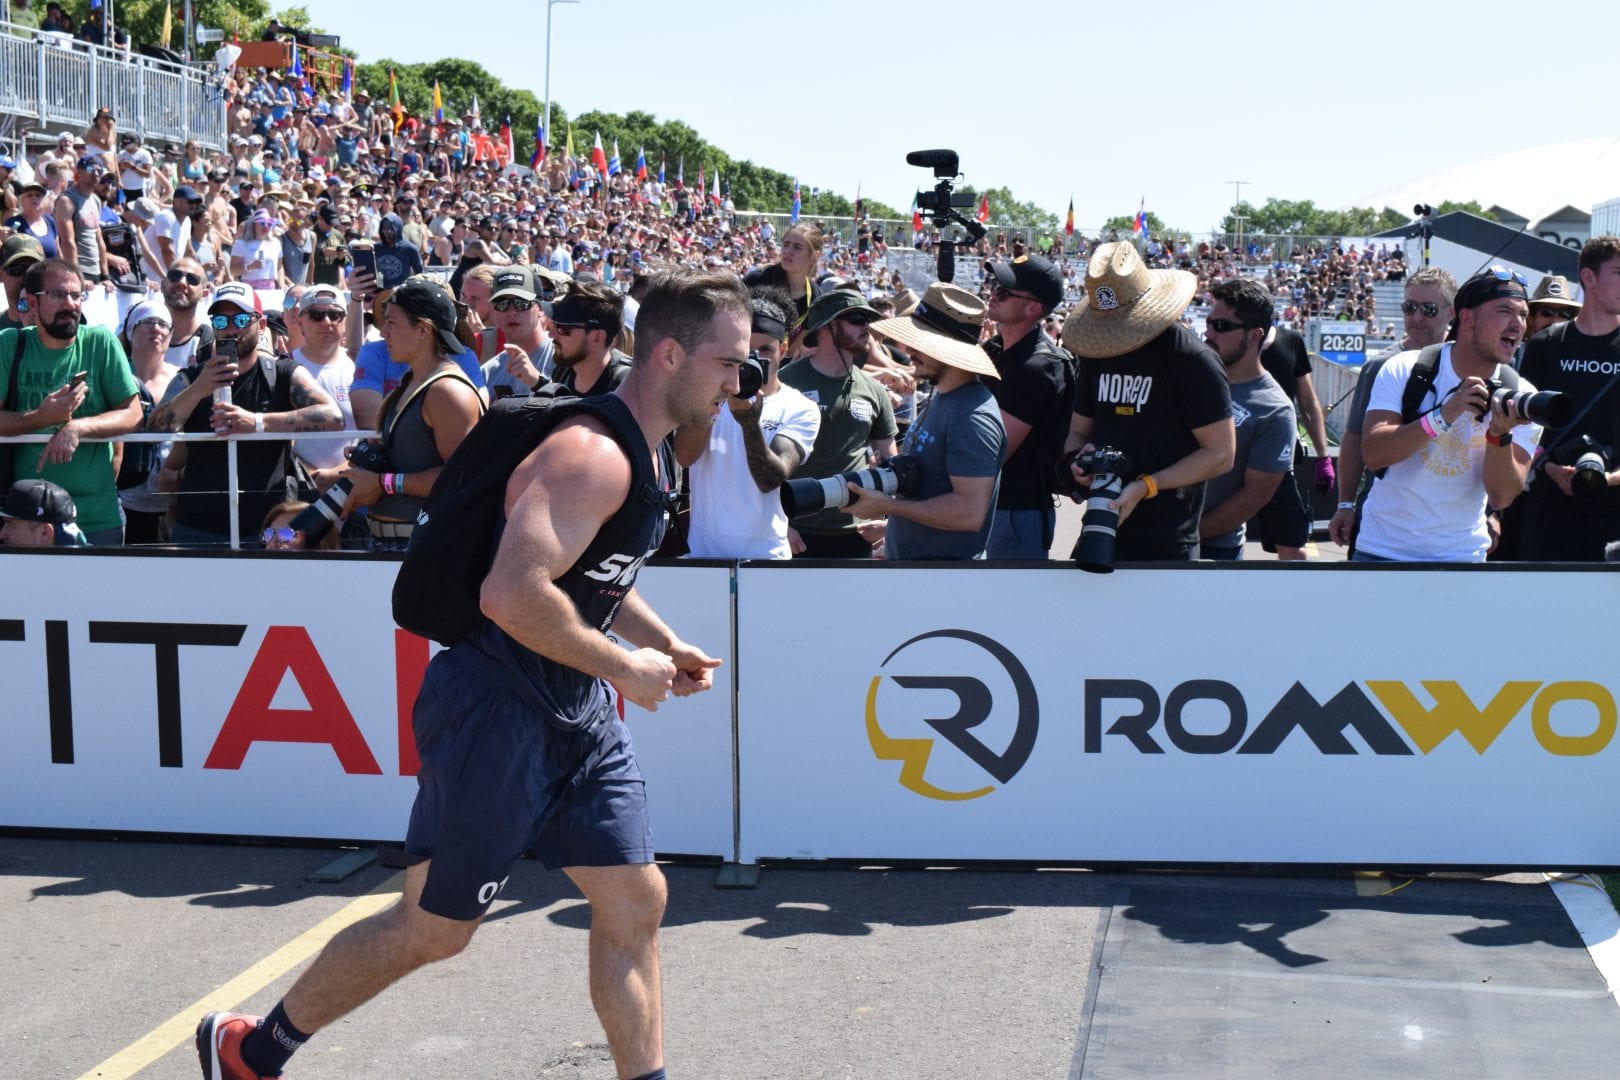 Ben Smith of the United States completes the Ruck Run event at the 2019 CrossFit Games